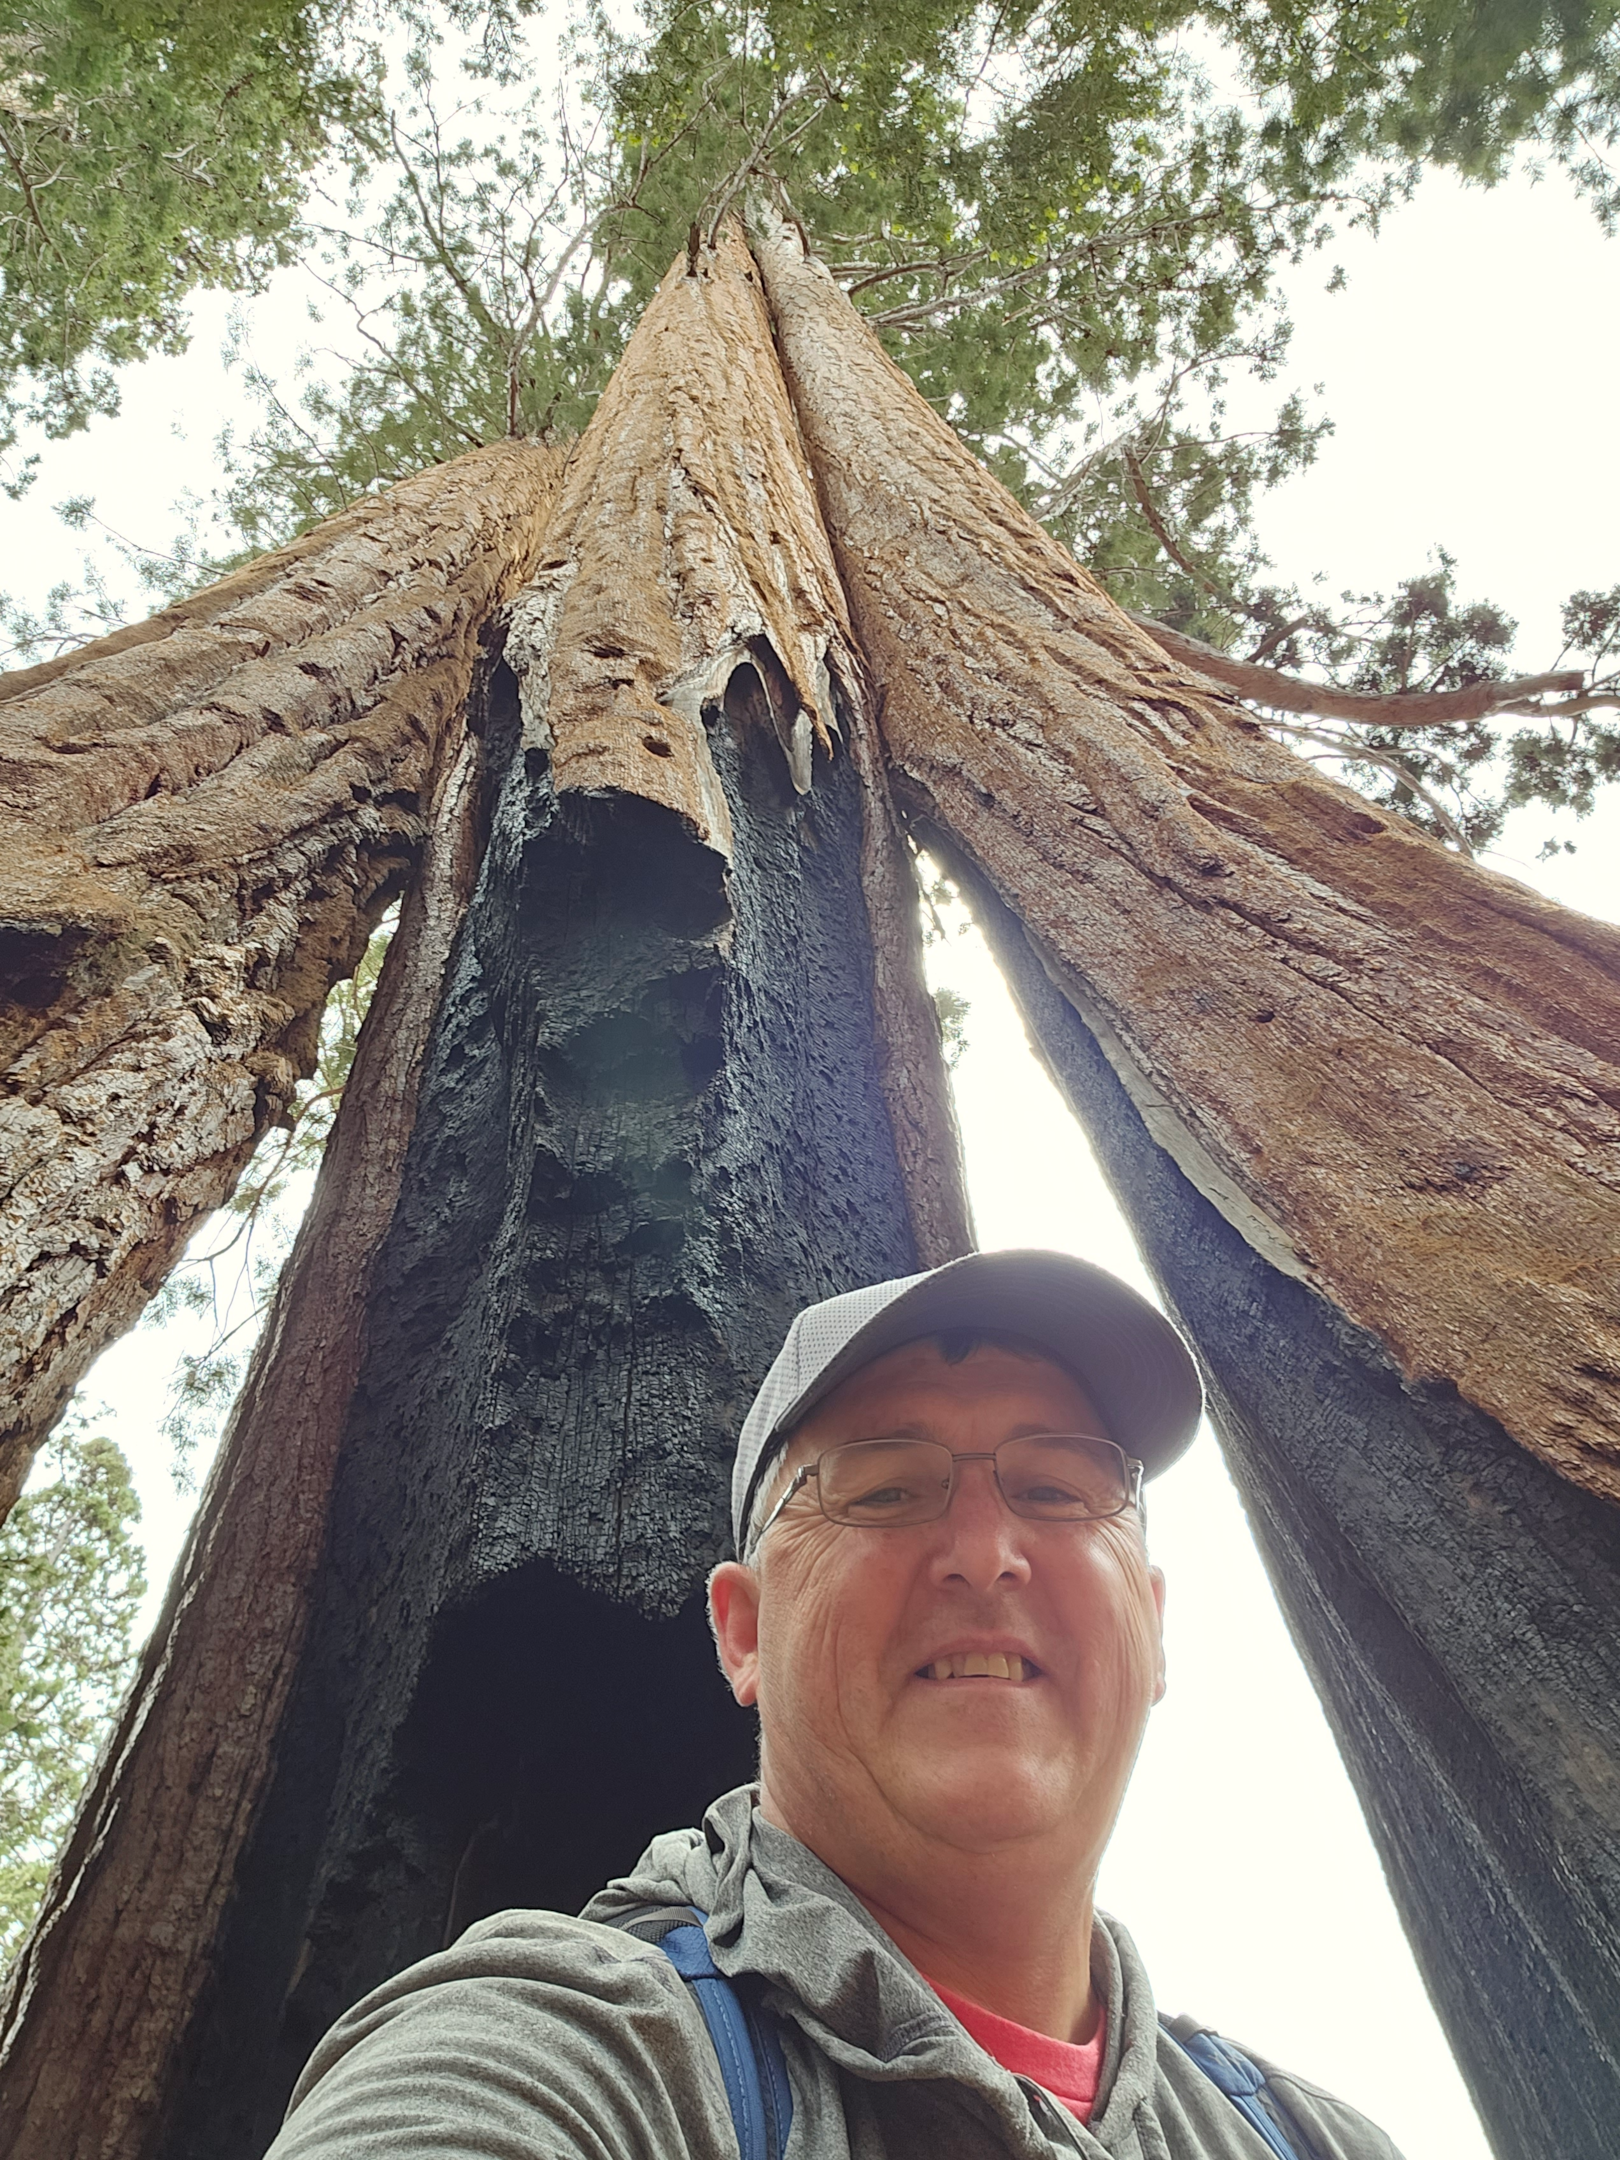 Man in front of Giant burnt out Sequoia